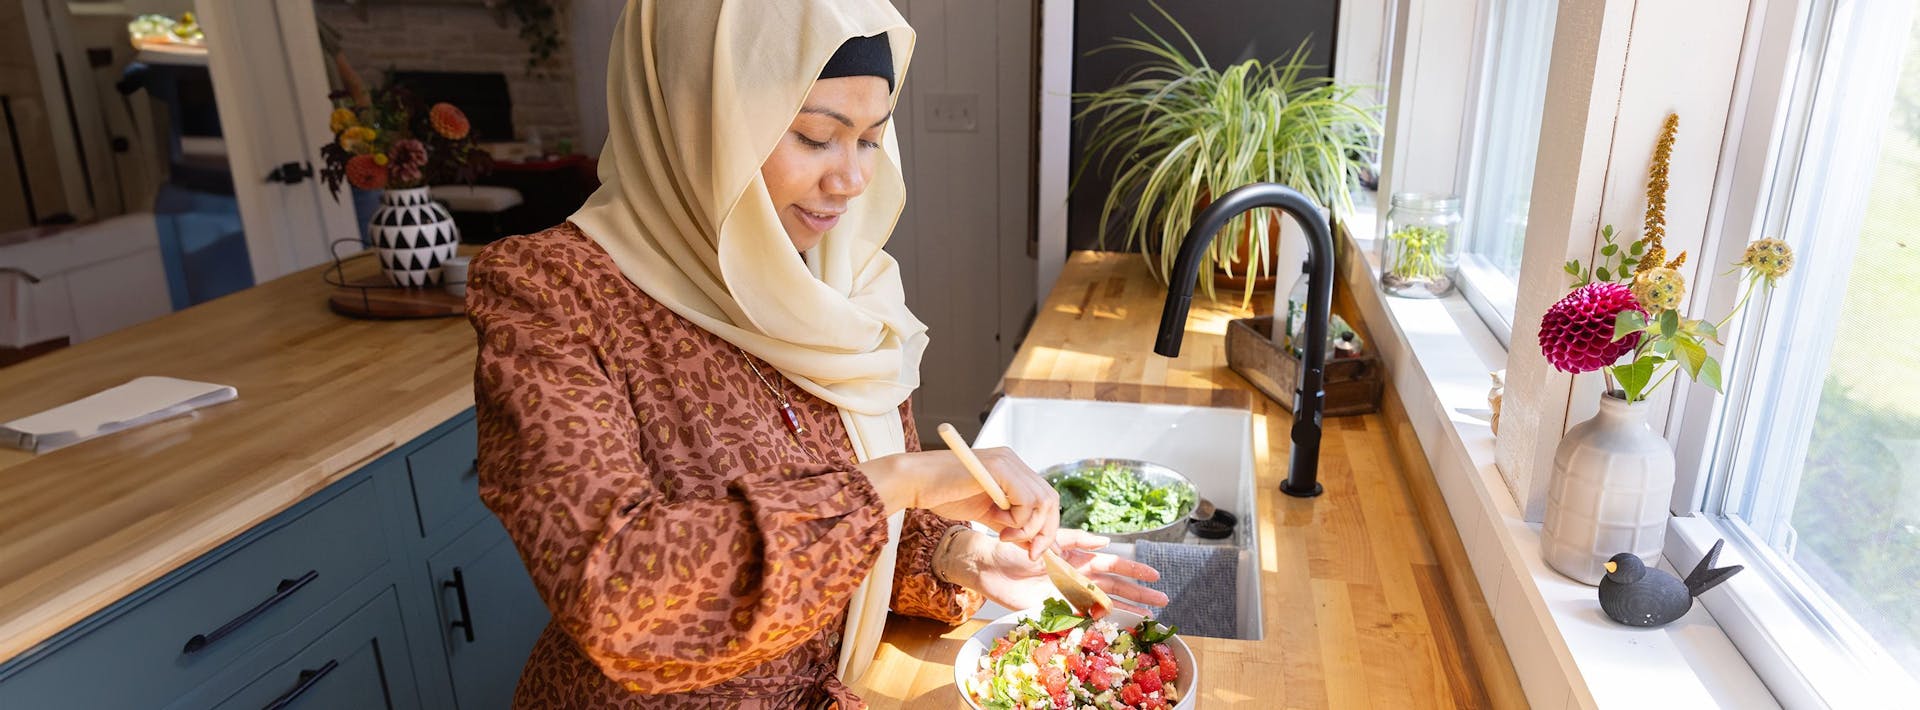 Woman assembling a salad in a kitchen.